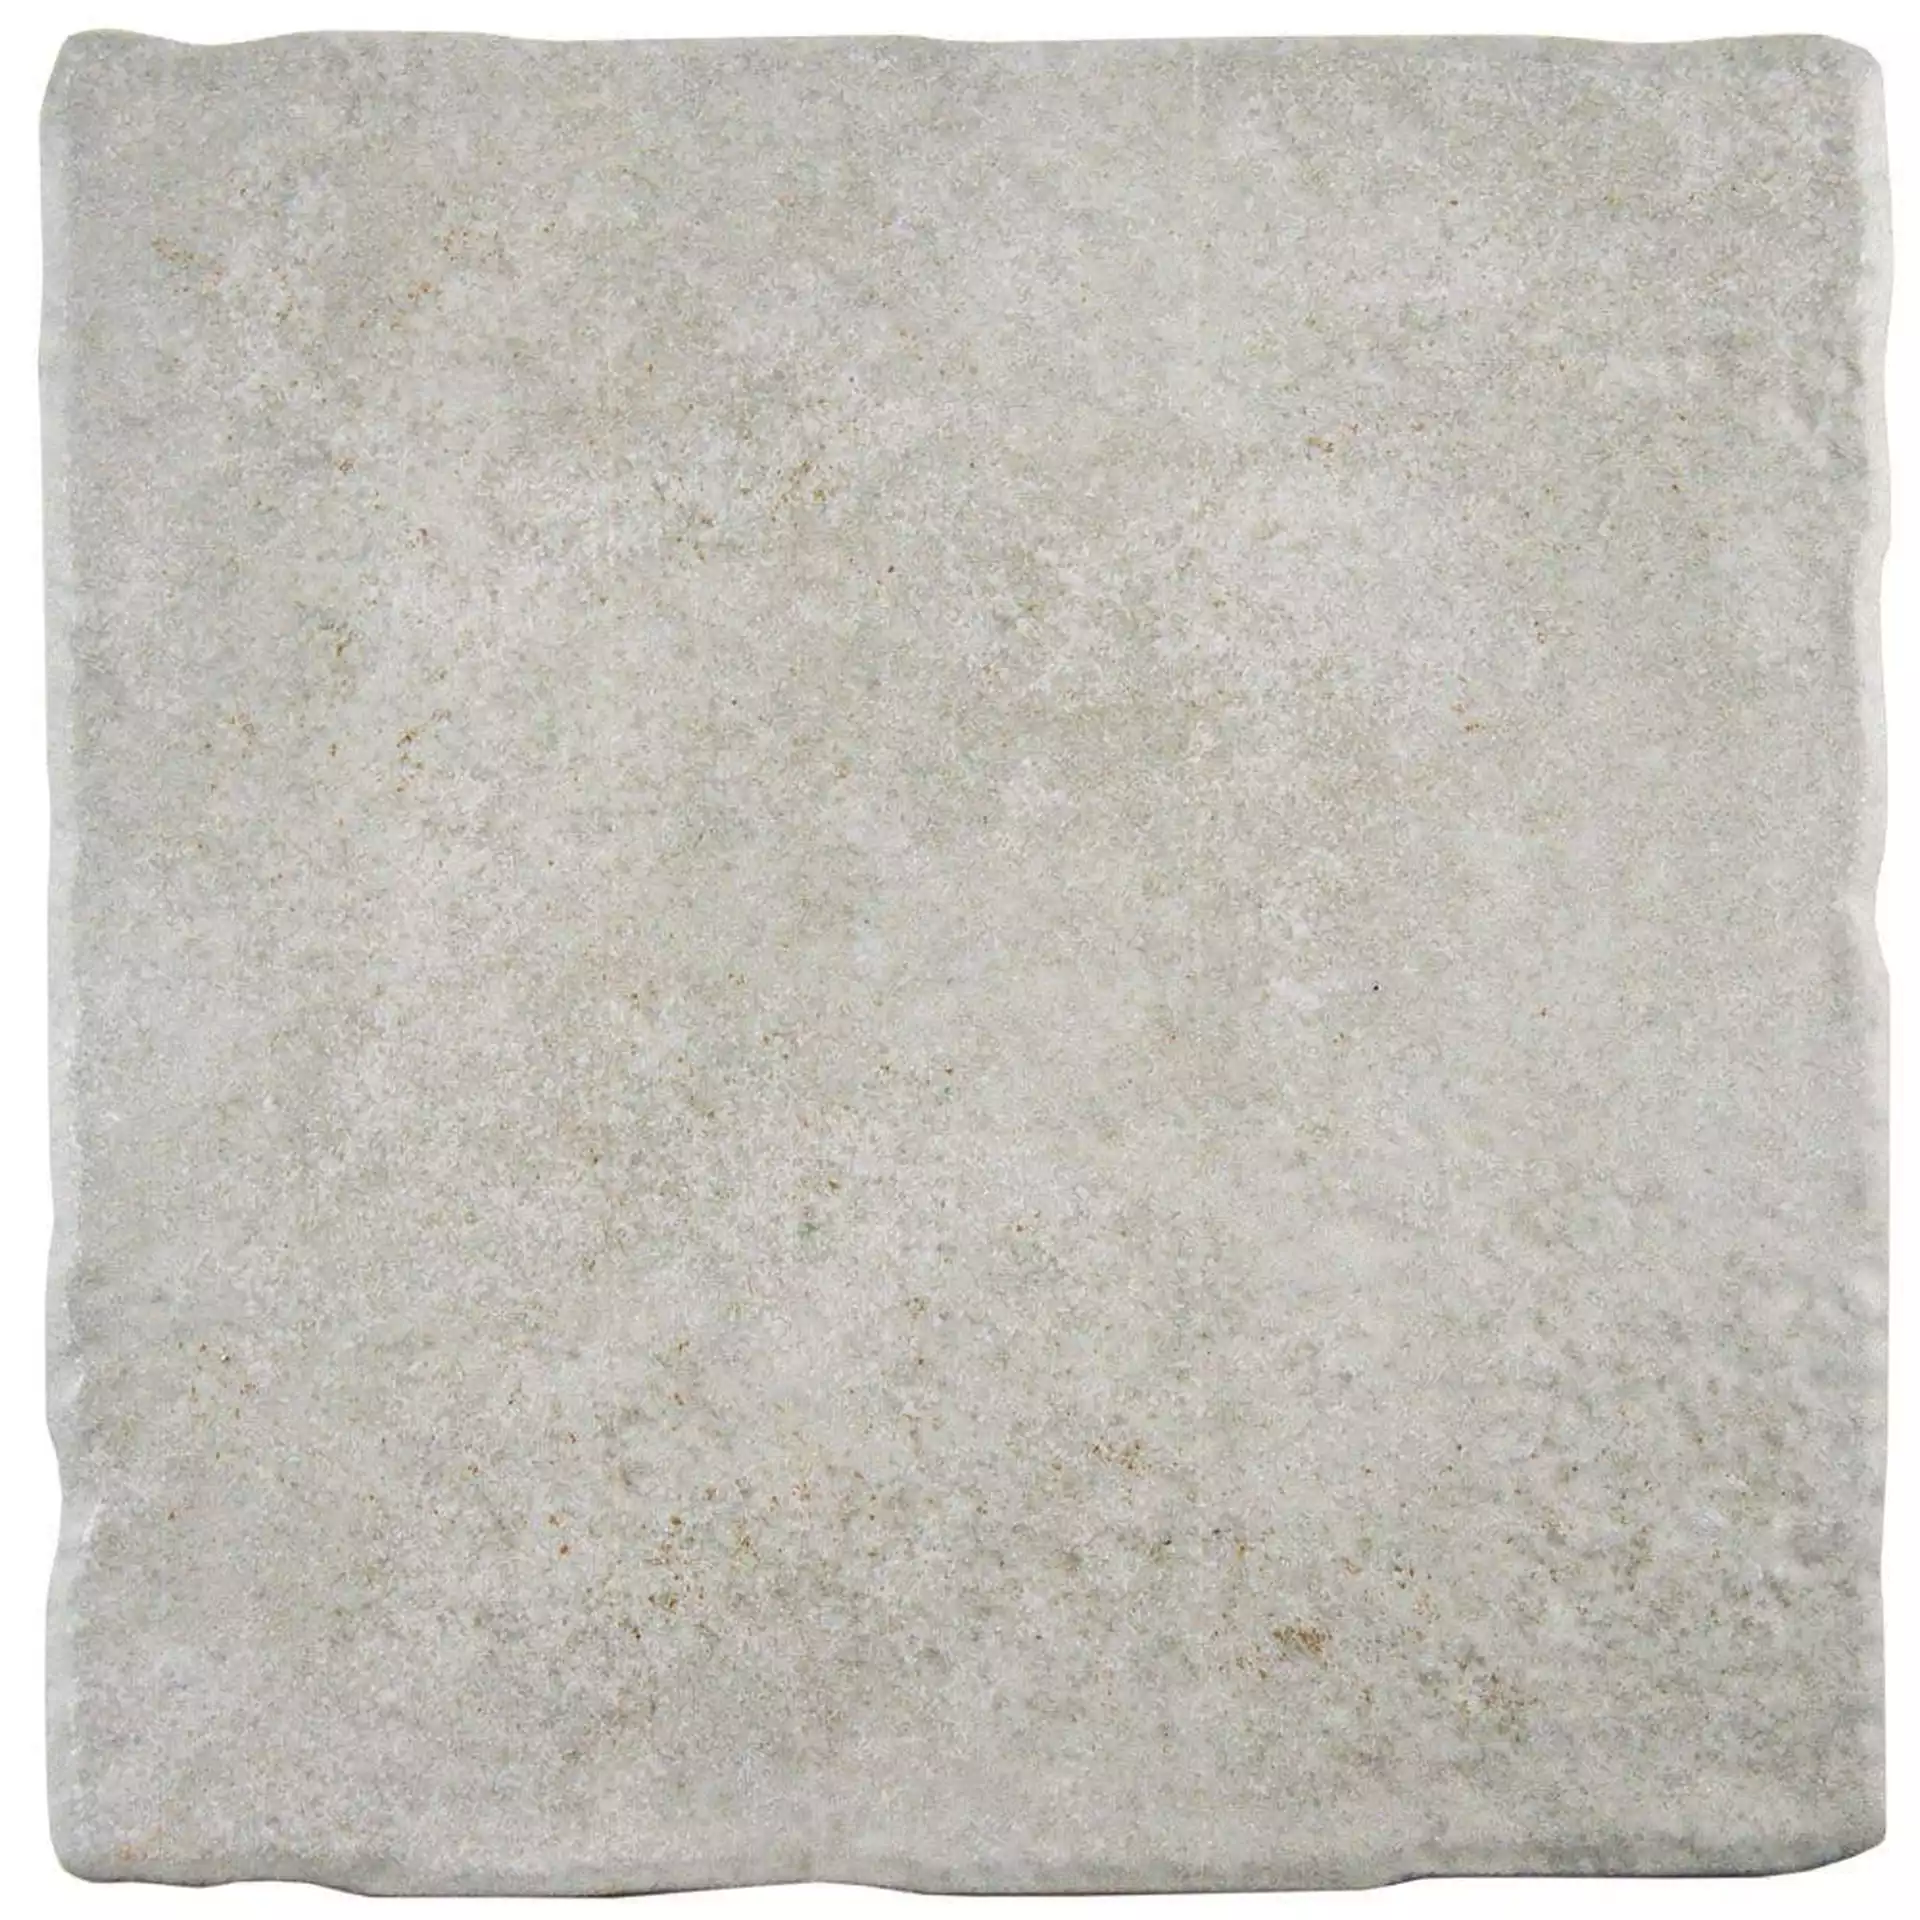 Merola Tile Costa Cendra 7-3/4 in. x 7-3/4 in. Ceramic Floor and Wall Tile (11.5 sq. ft. / case), Cendra/Low Sheen